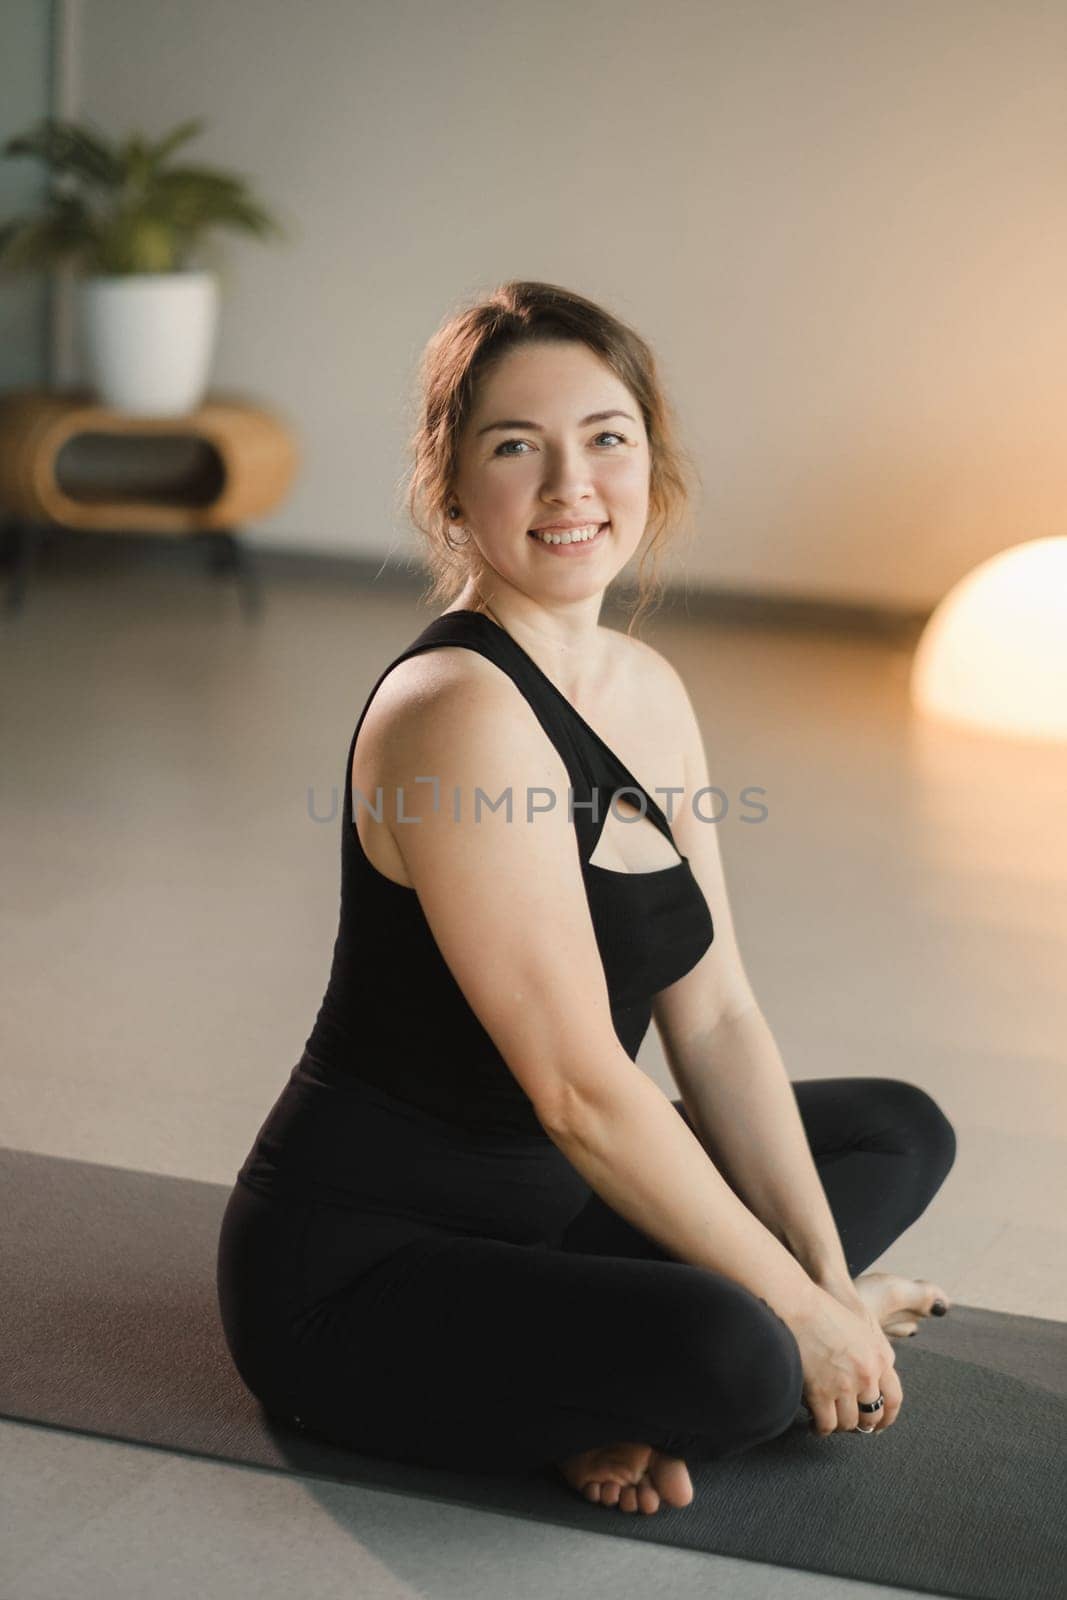 A girl in black sportswear is sitting on a yoga mat and smiling by Lobachad